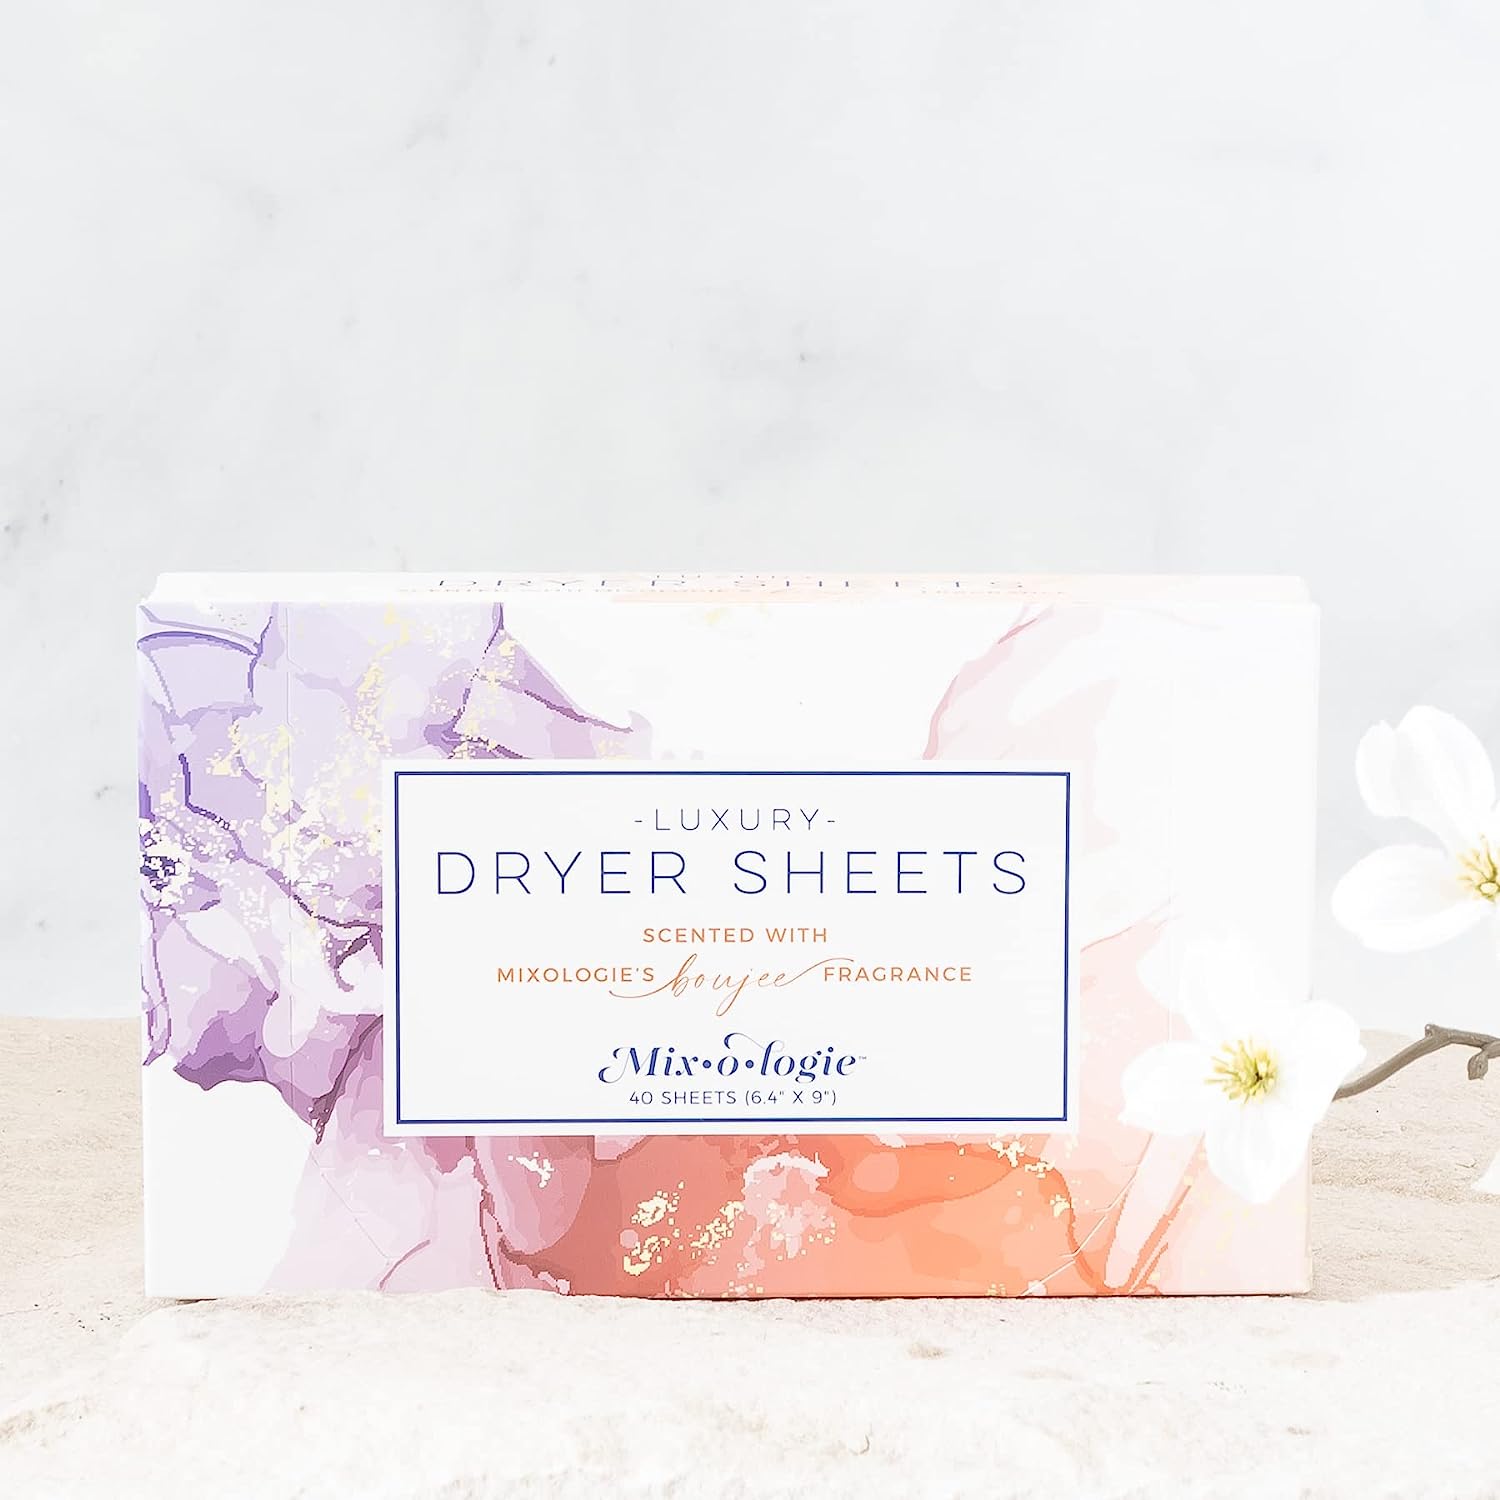 Boujee Luxury Fabric Softener Dryer Sheets by Mixologie